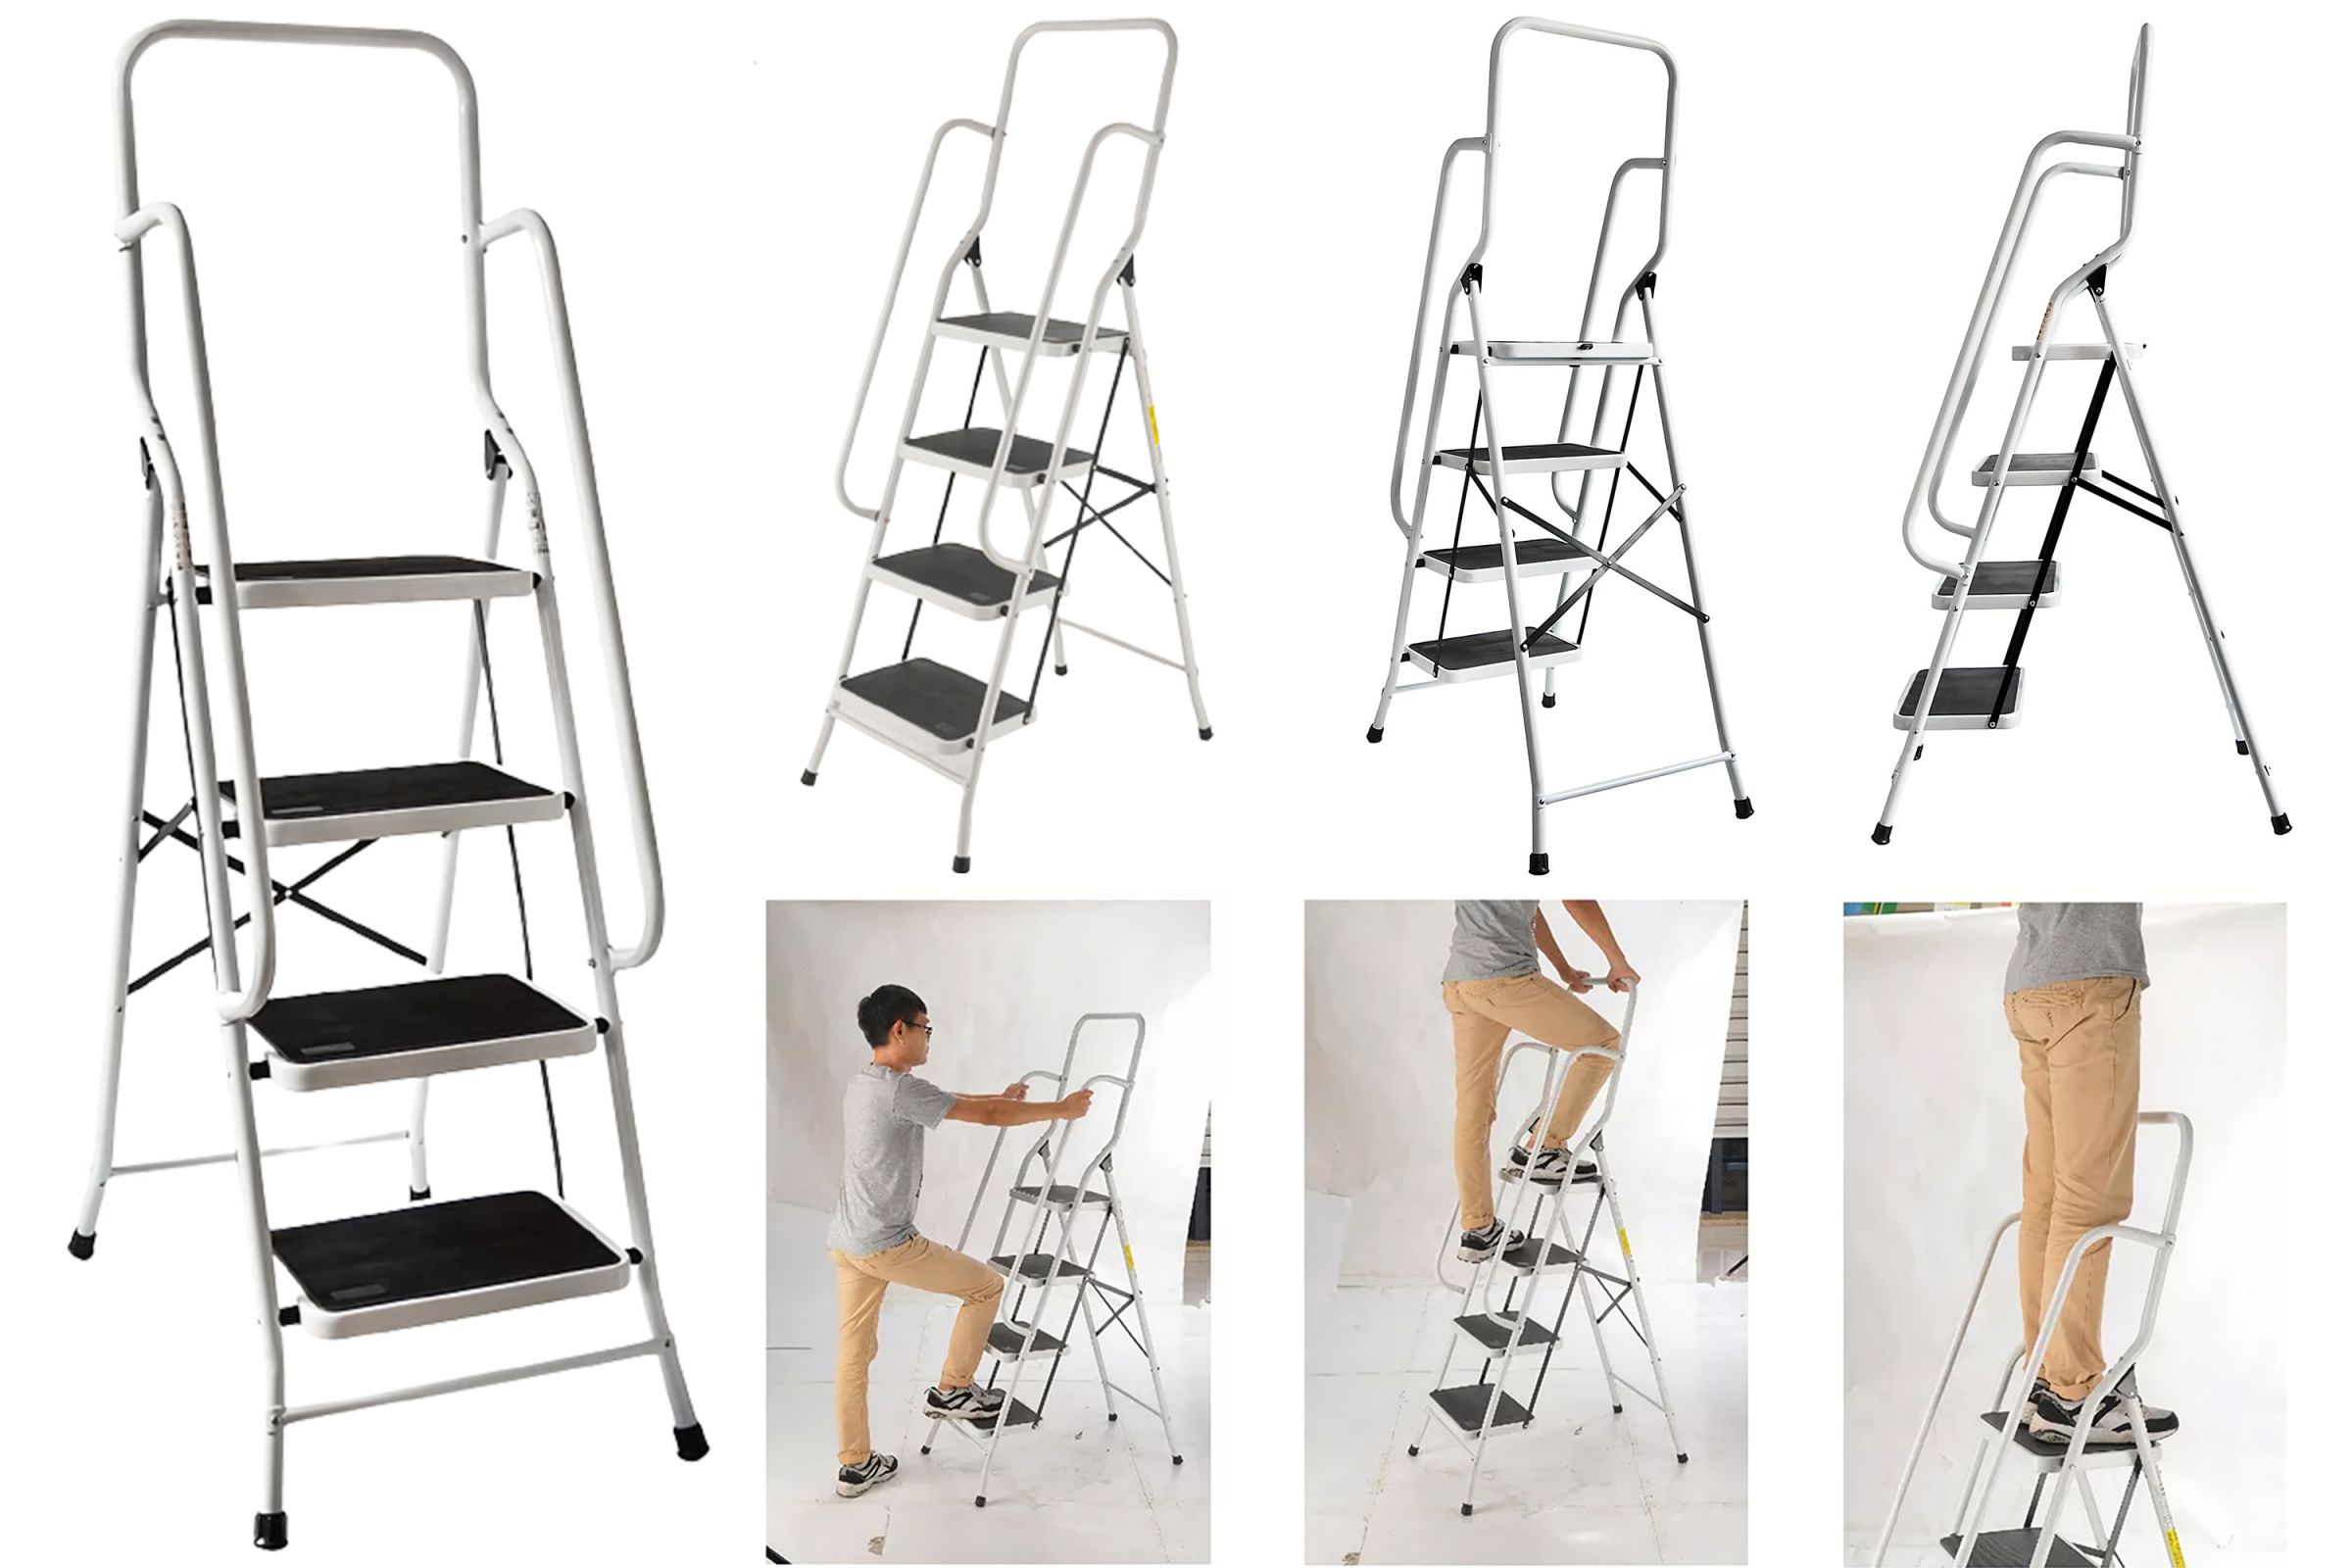 4 Steps Steel Folding Ladder With Safety Guard Handrails Loading 150 kg 330 lbs